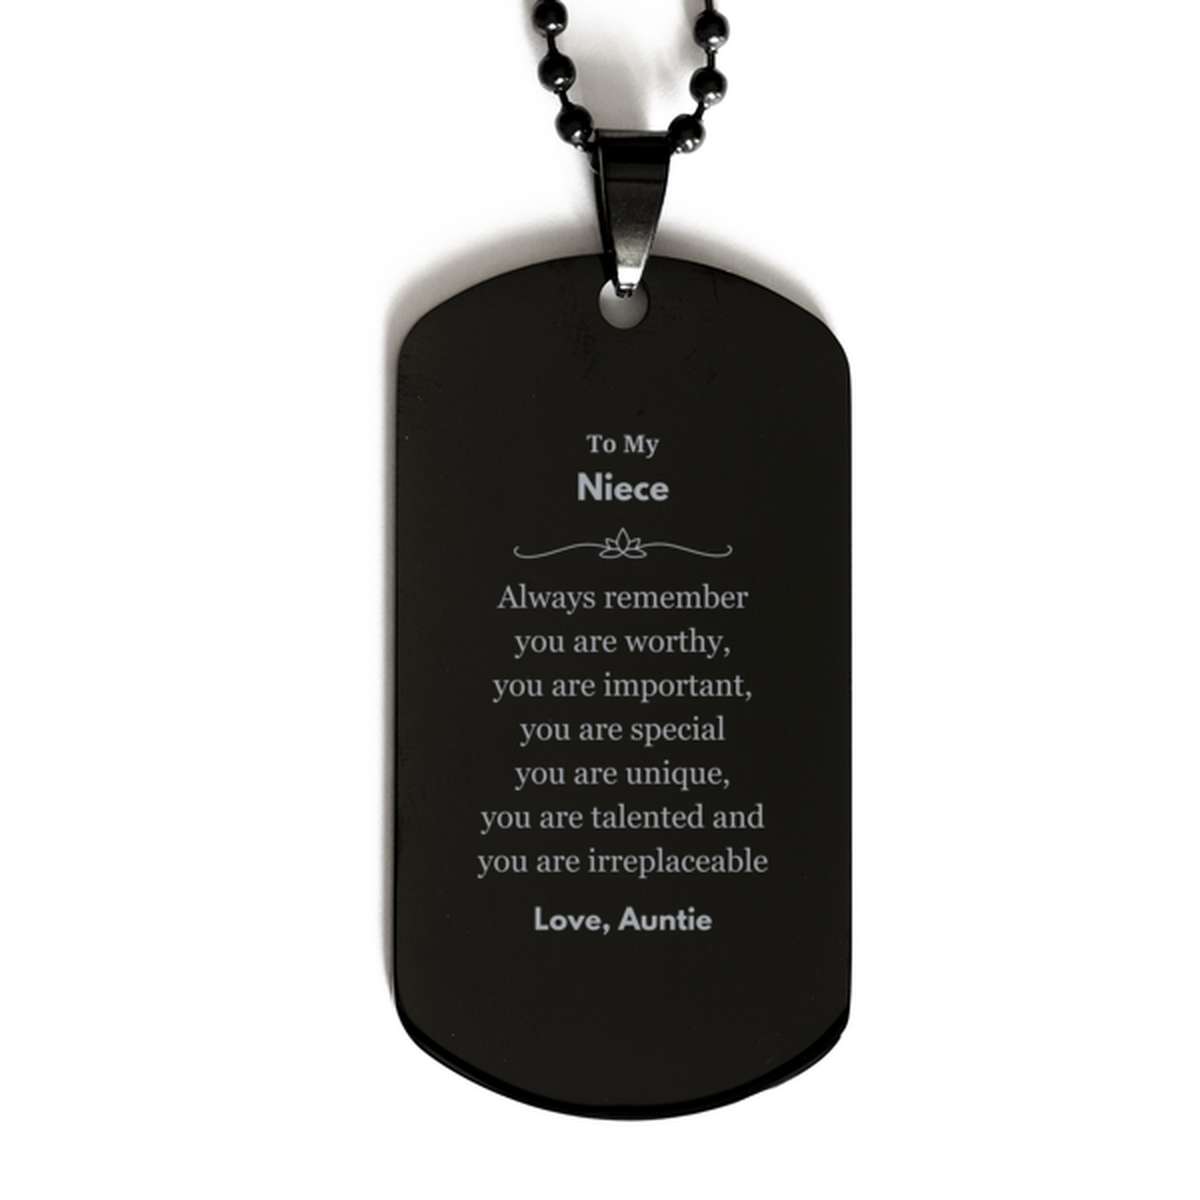 Niece Birthday Gifts from Auntie, Inspirational Black Dog Tag for Niece Christmas Graduation Gifts for Niece Always remember you are worthy, you are important. Love, Auntie